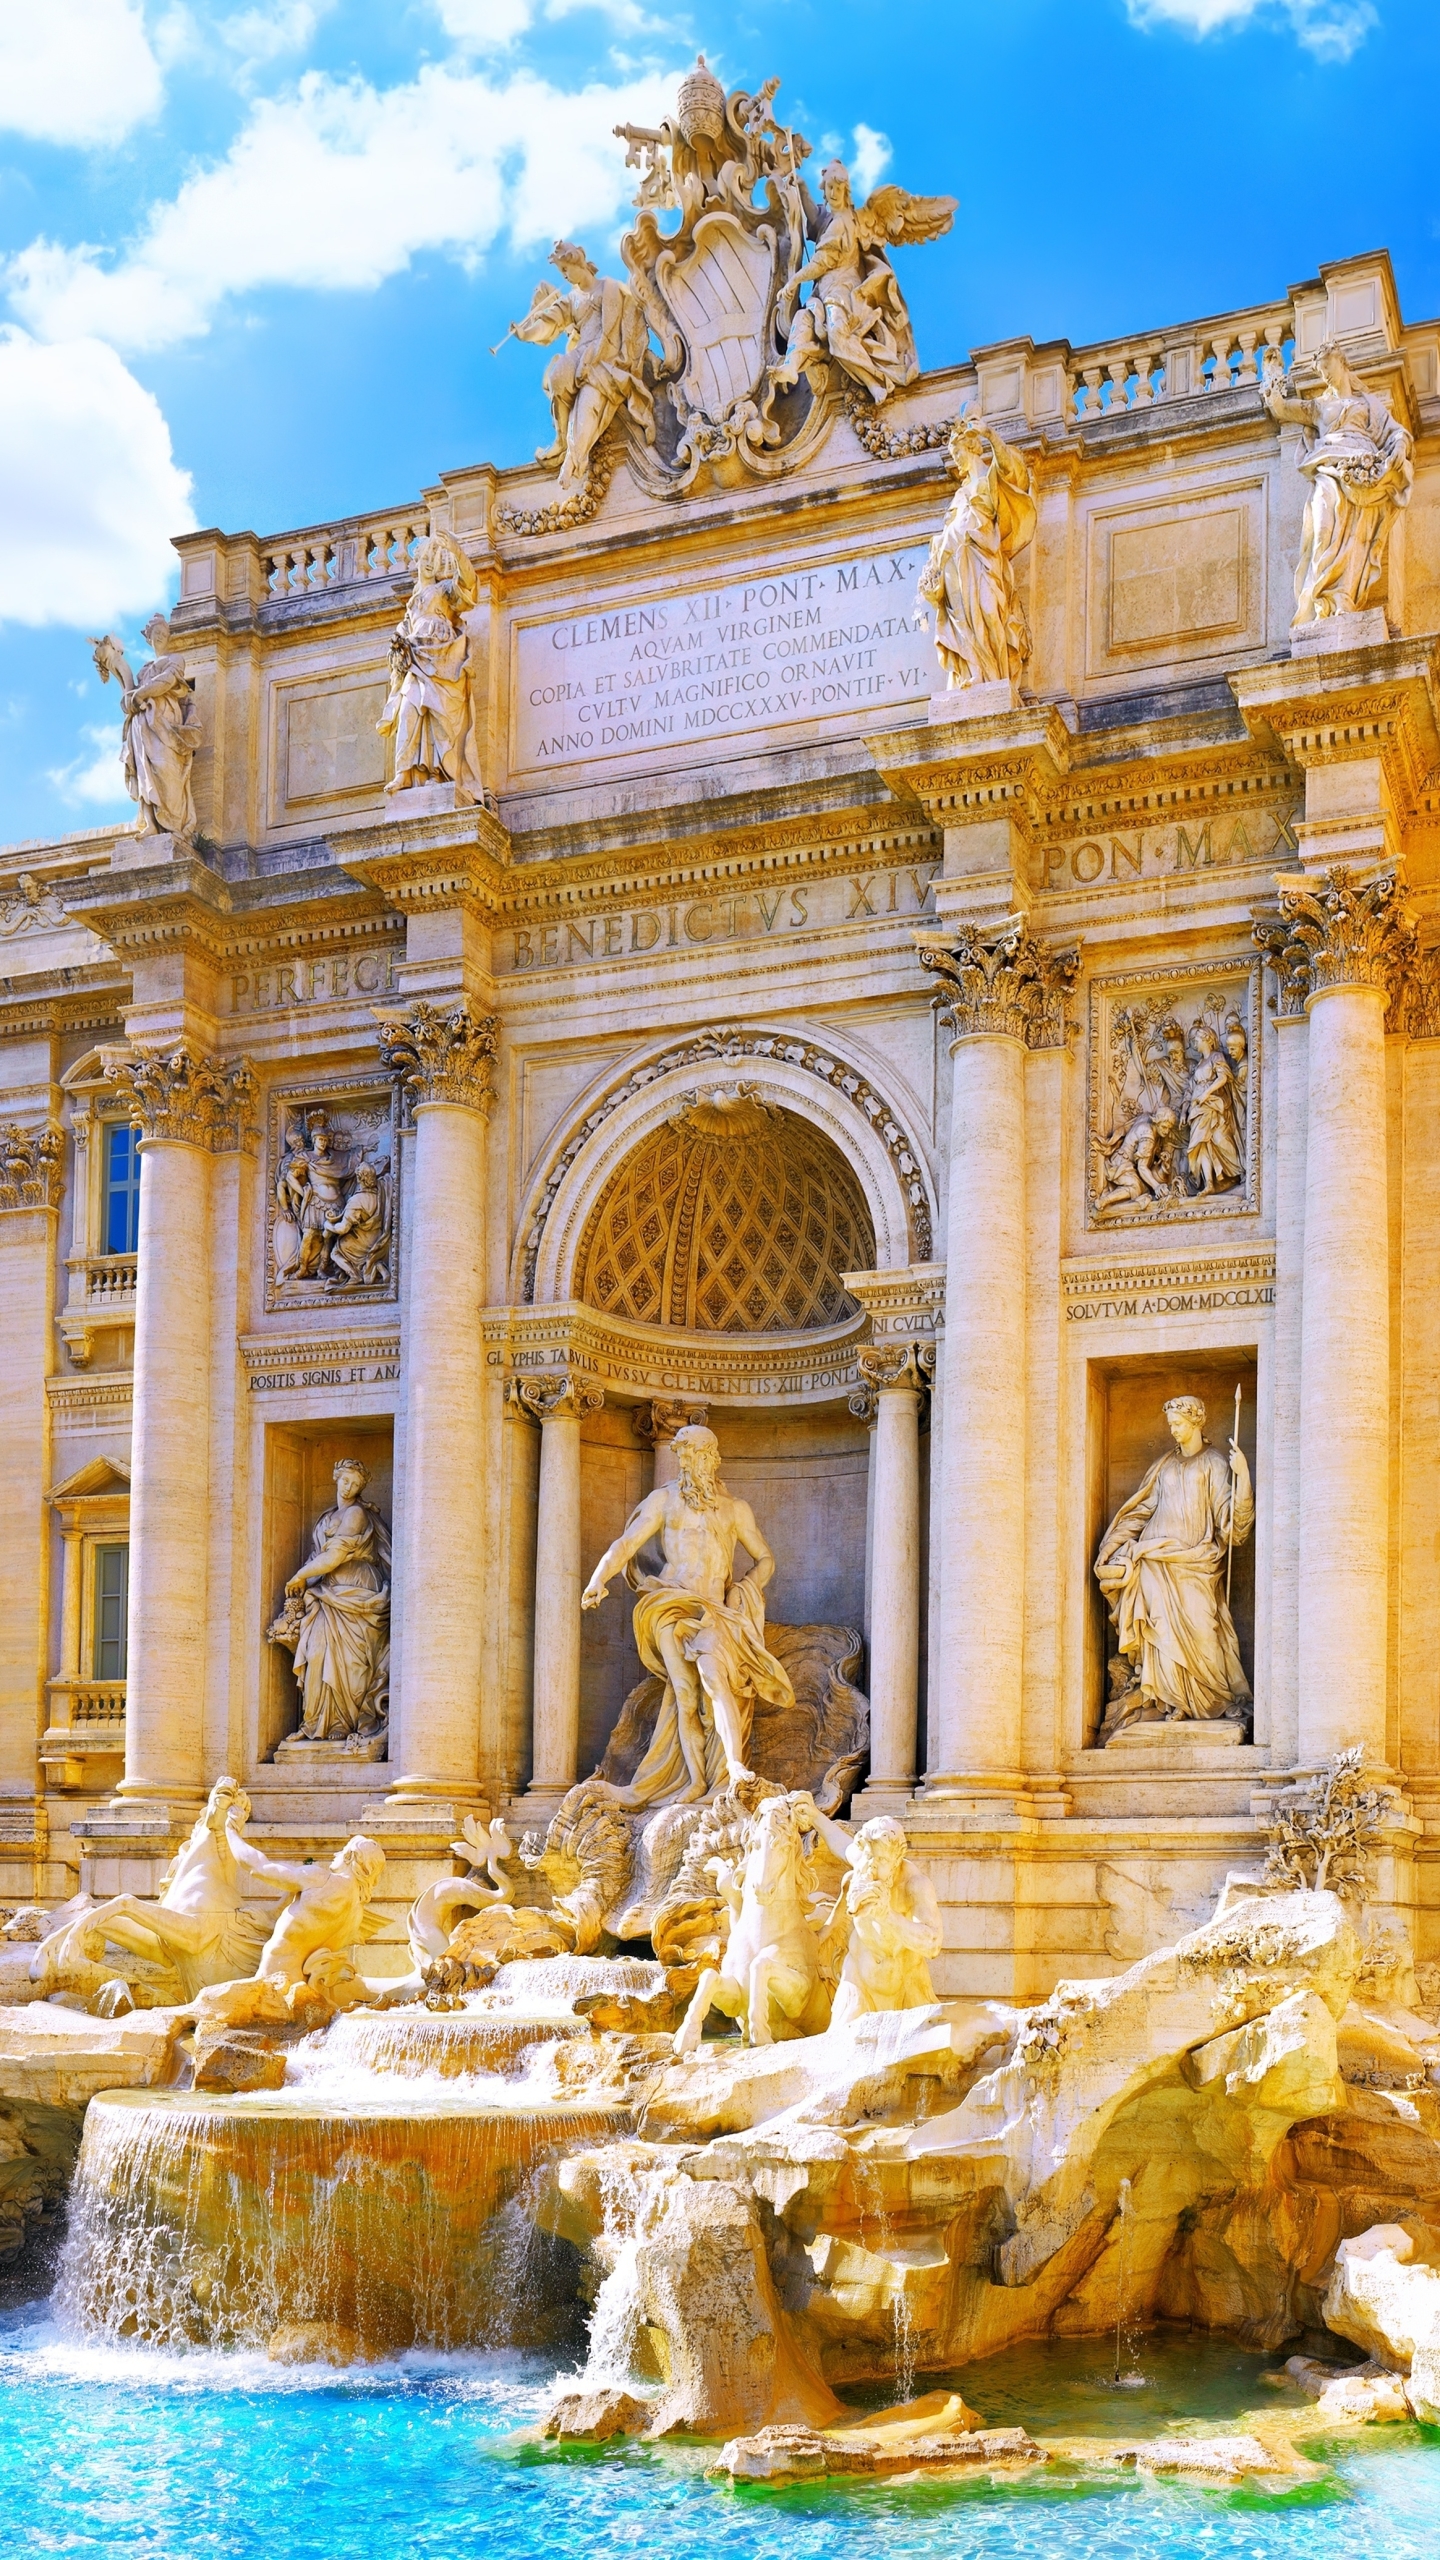 italy, rome, trevi, man made, trevi fountain, statue, fountain, building, monuments QHD